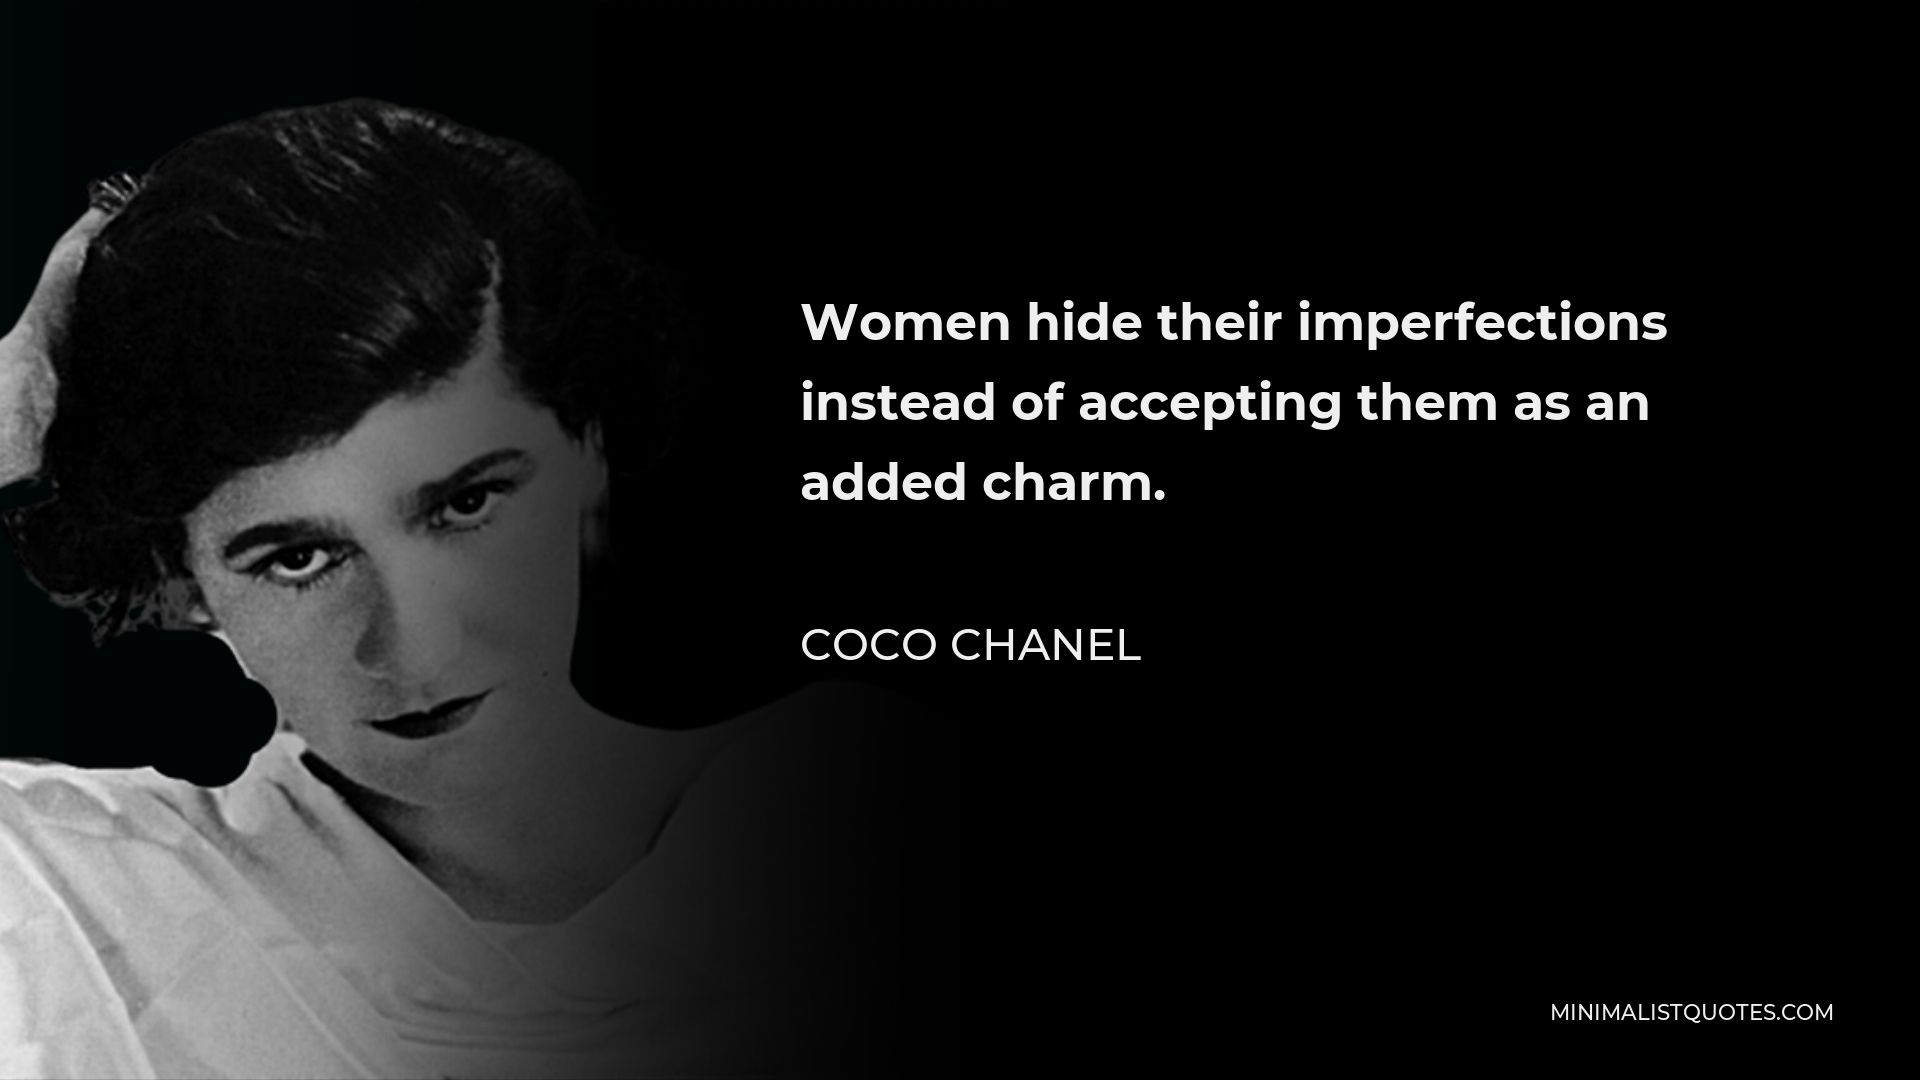 Coco Chanel Quote - Women hide their imperfections instead of accepting them as an added charm.